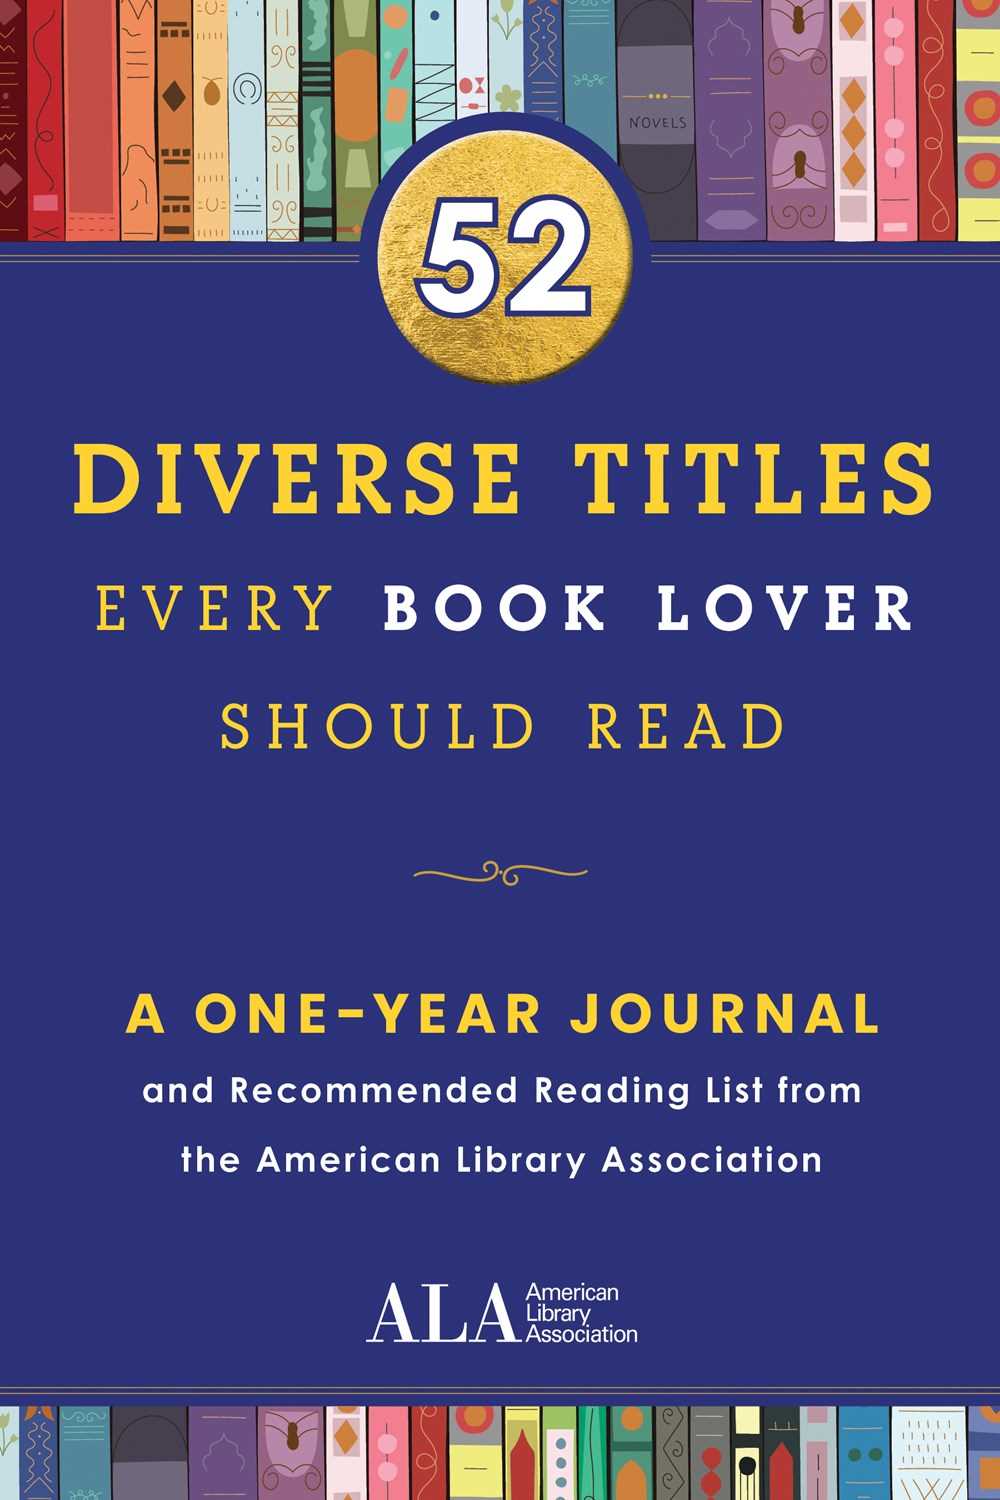 52 Diverse Titles Every Book Lover Should Read